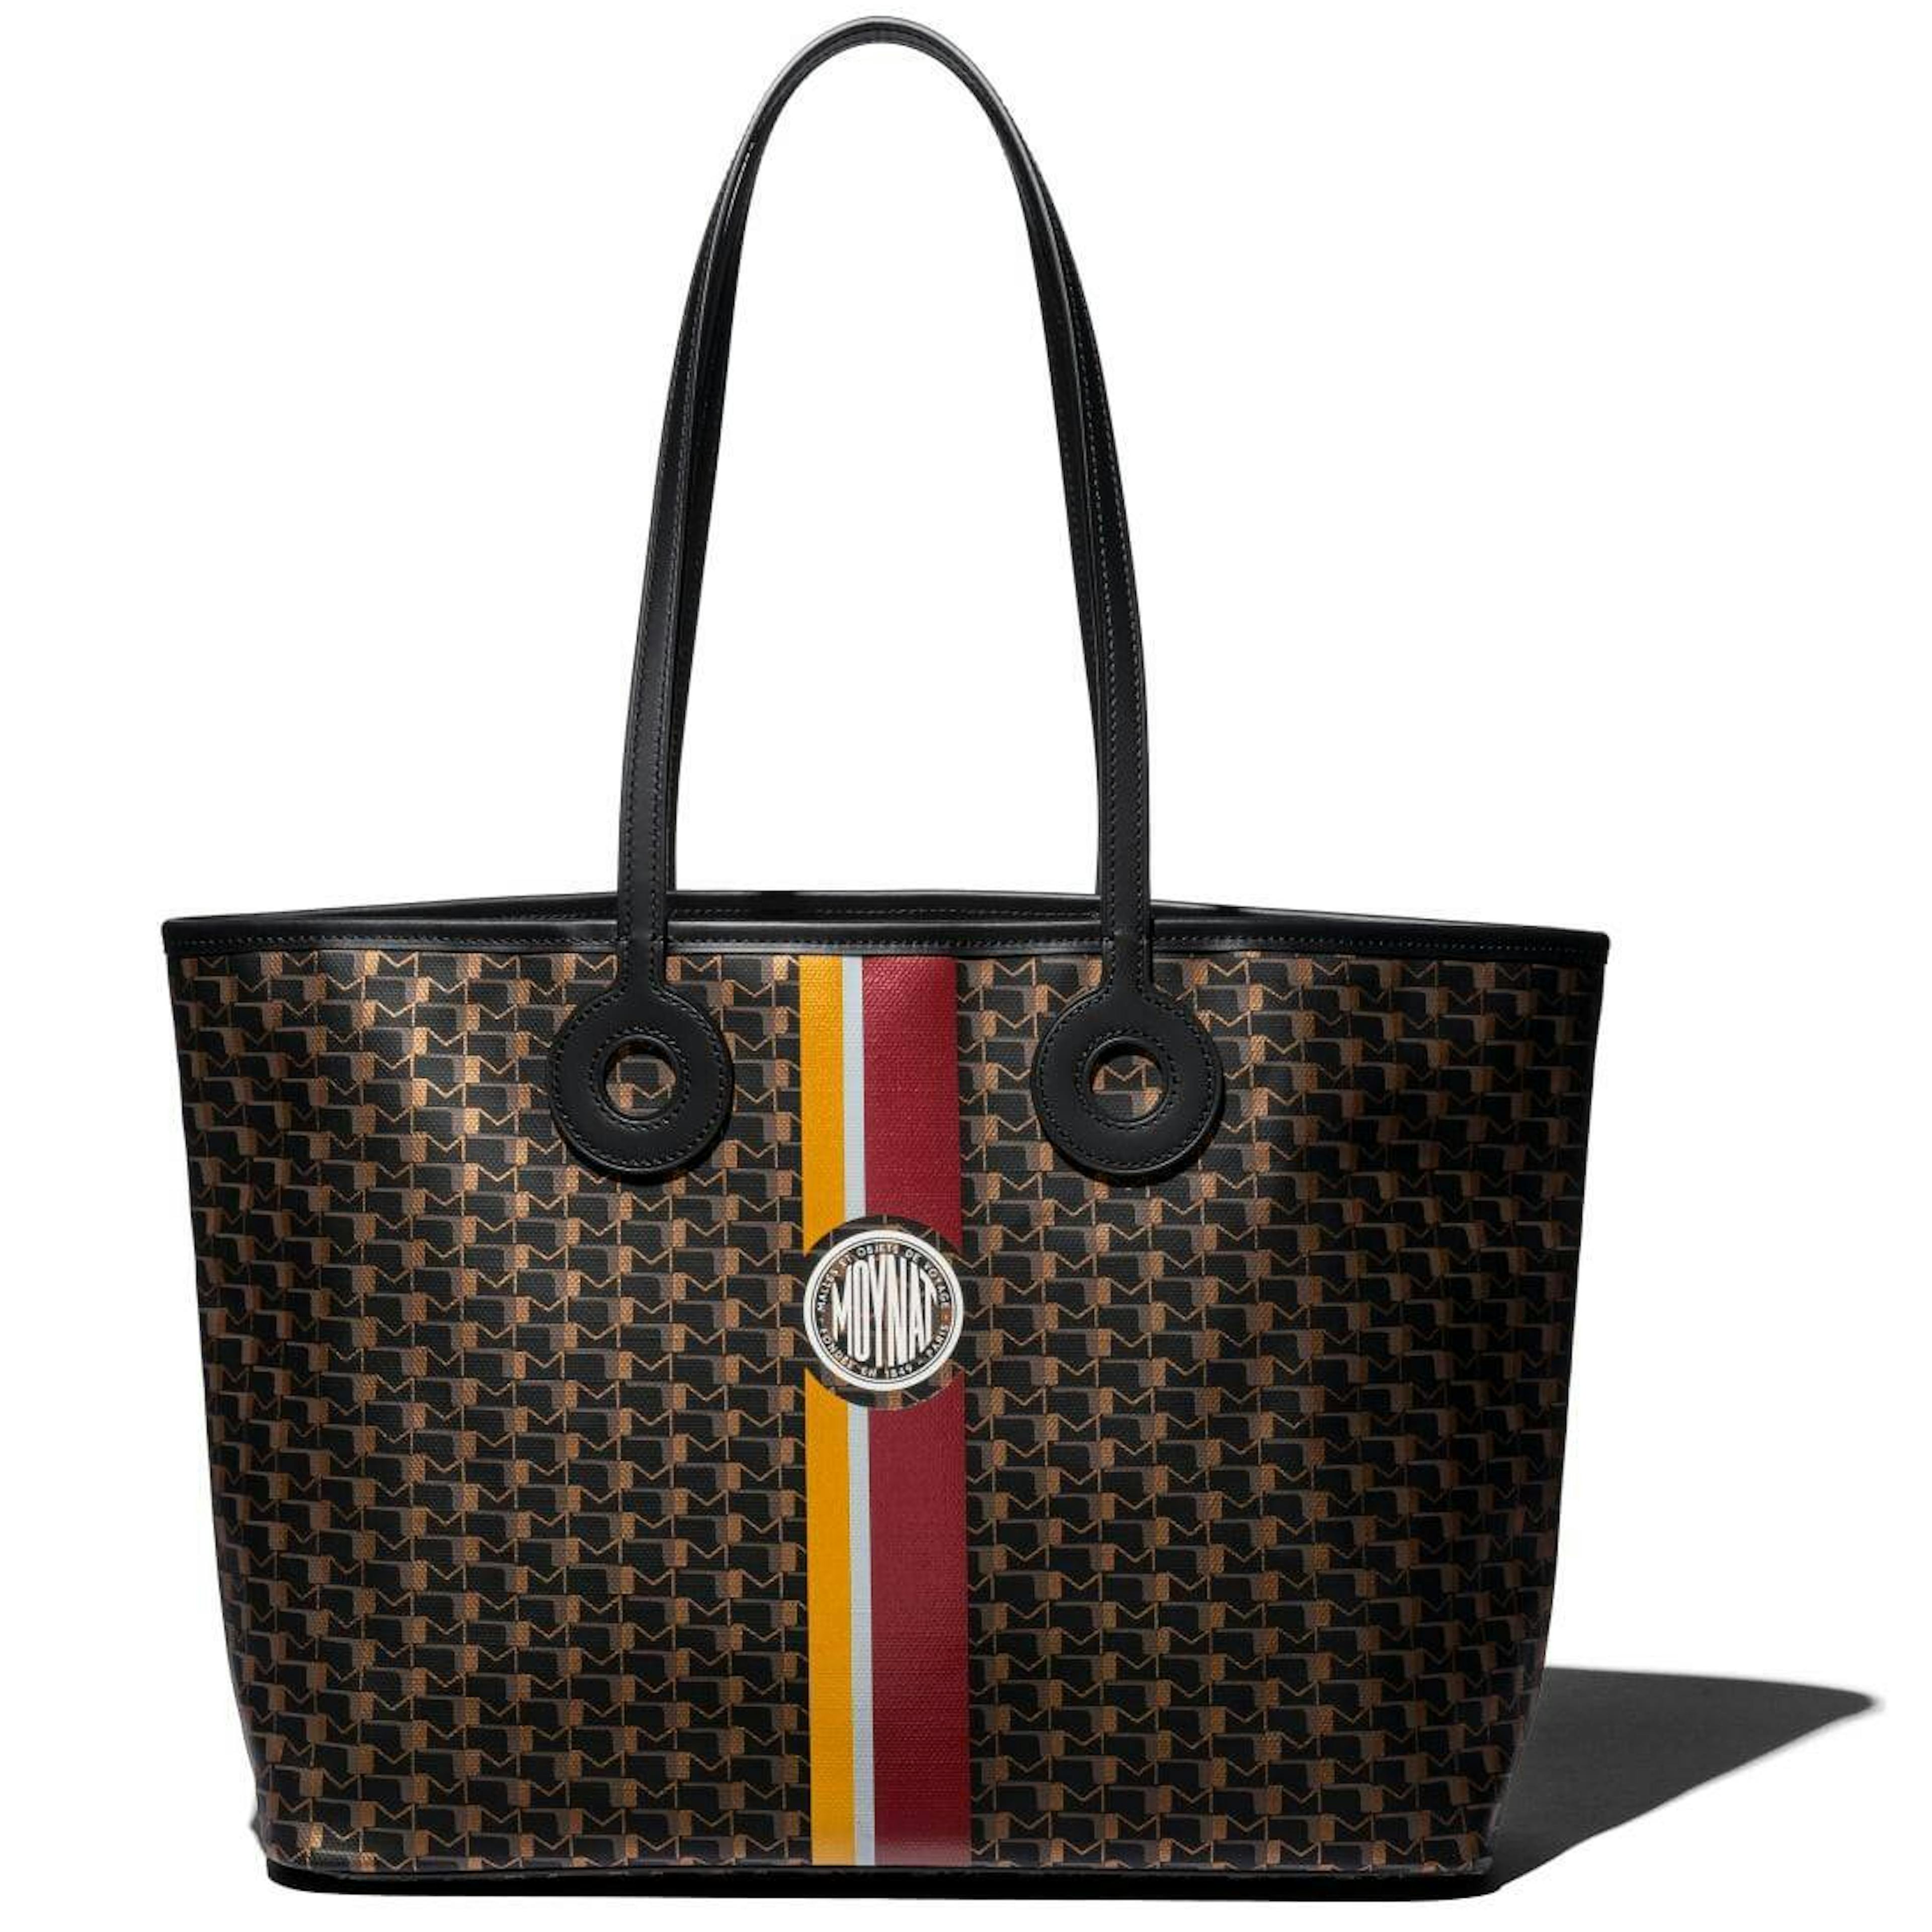 The Oh!Tote Heritage @ Moynat